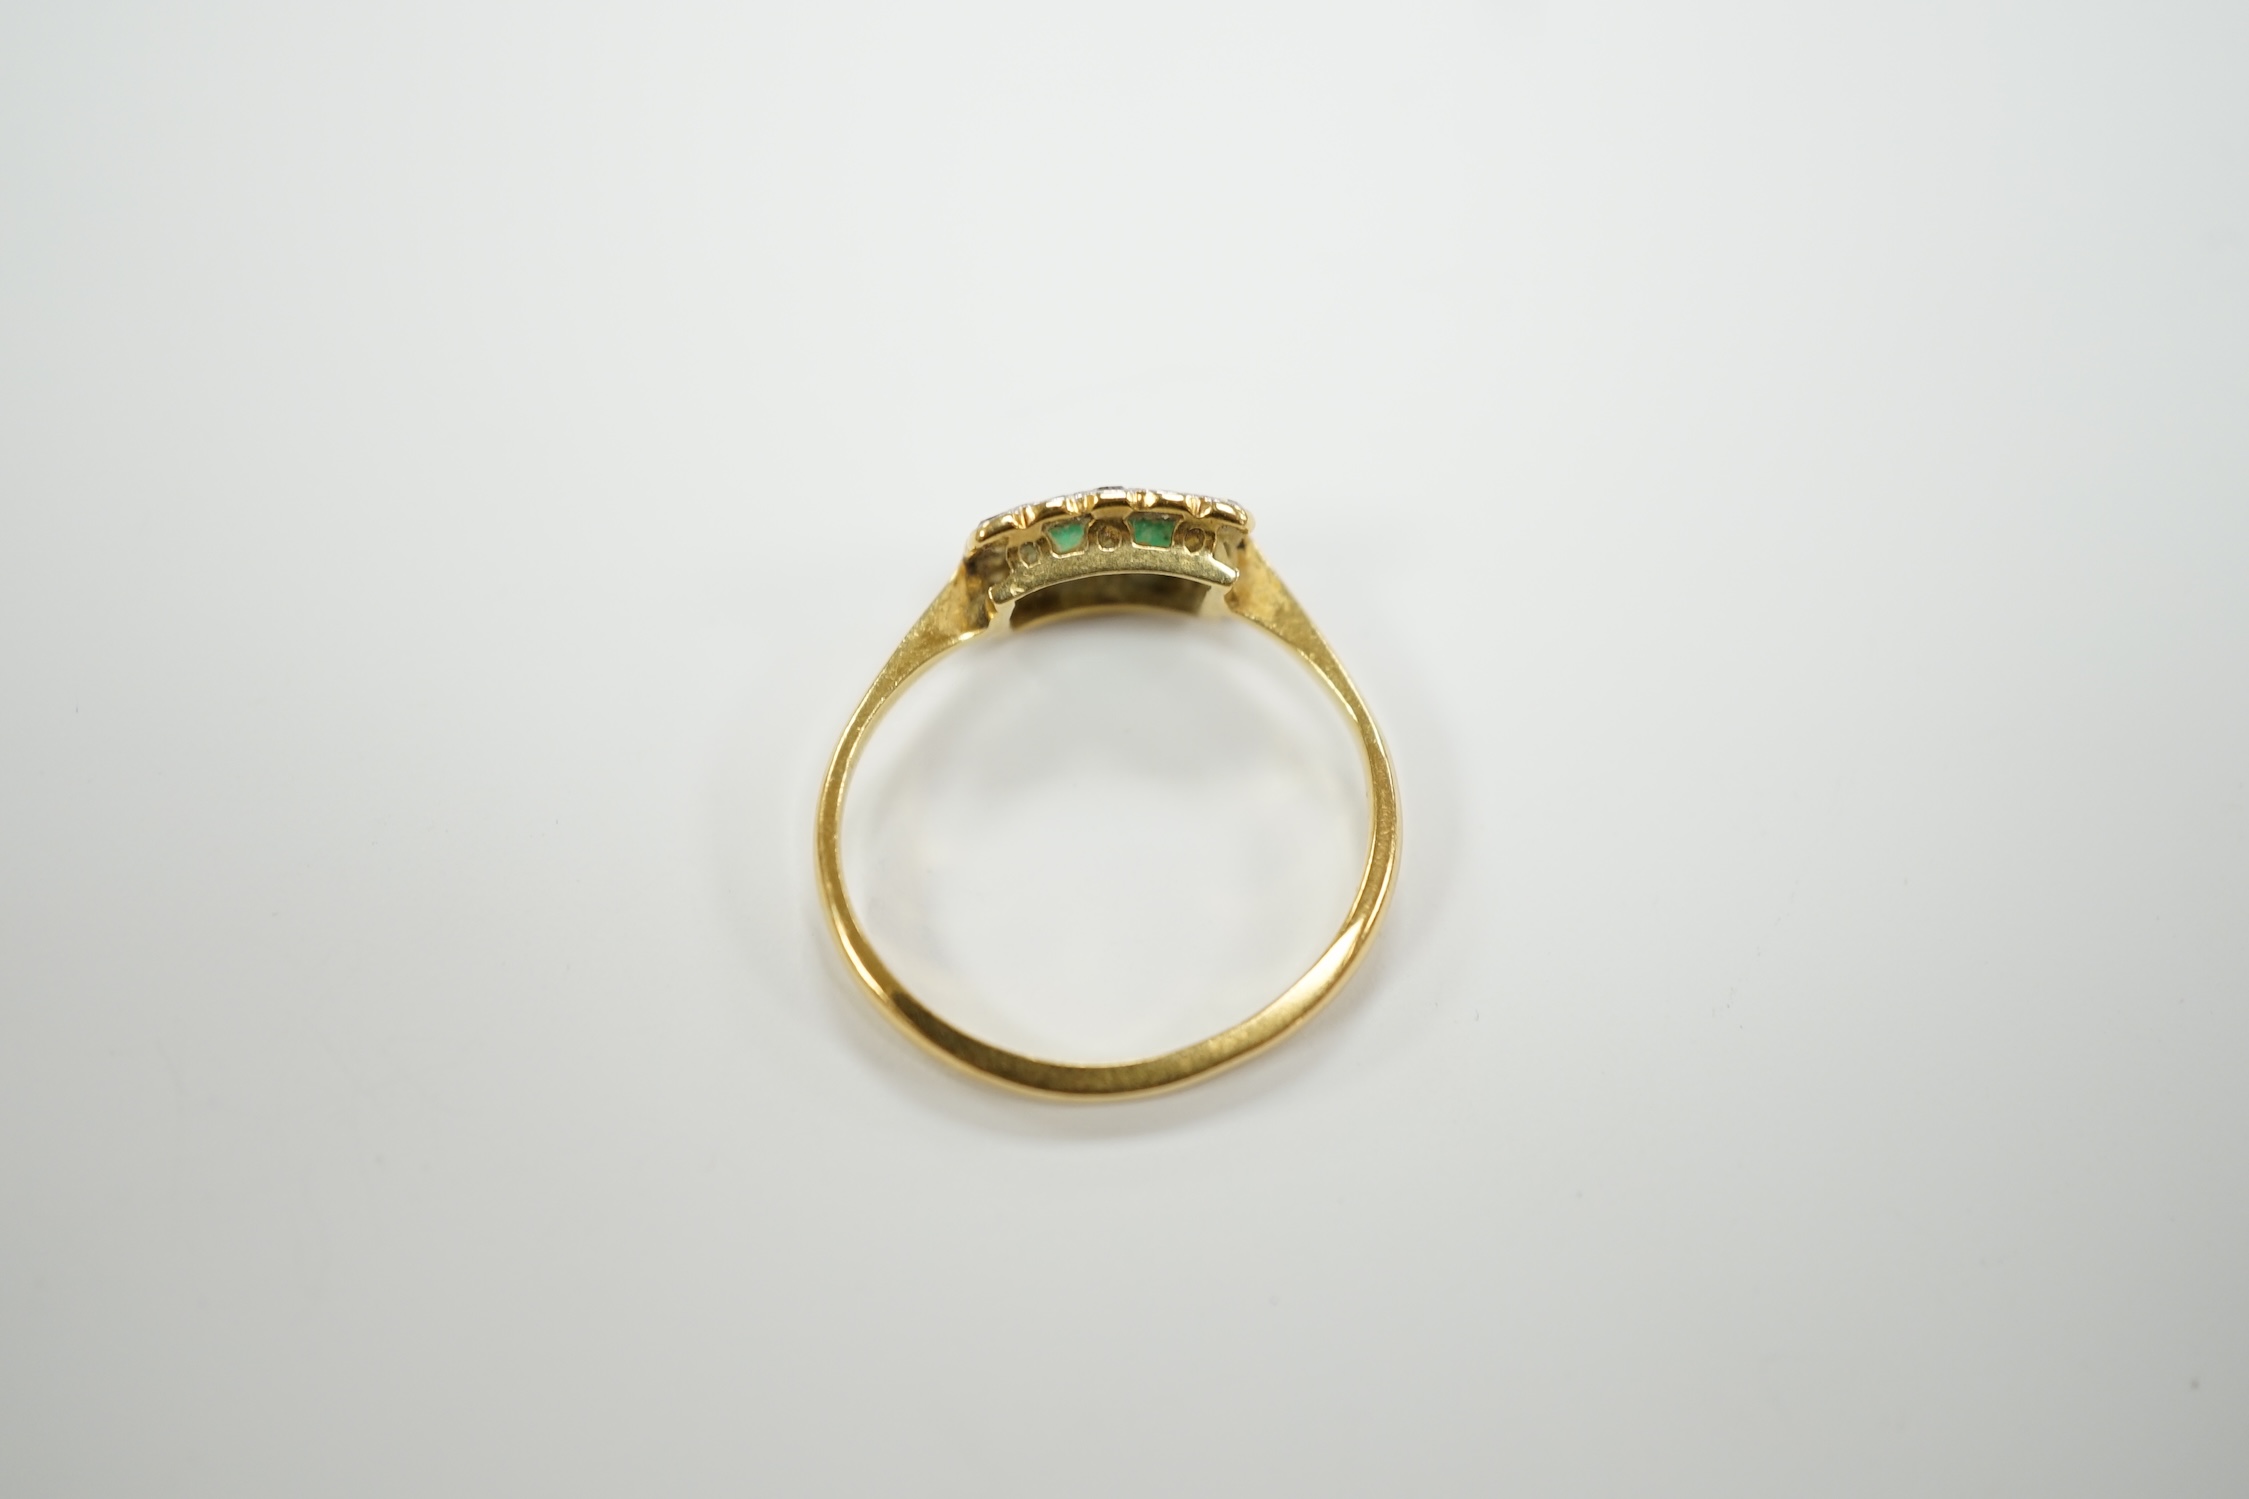 An 18ct, two stone emerald and diamond cluster set tablet ring, size M/N, gross weight 2.2 grams.